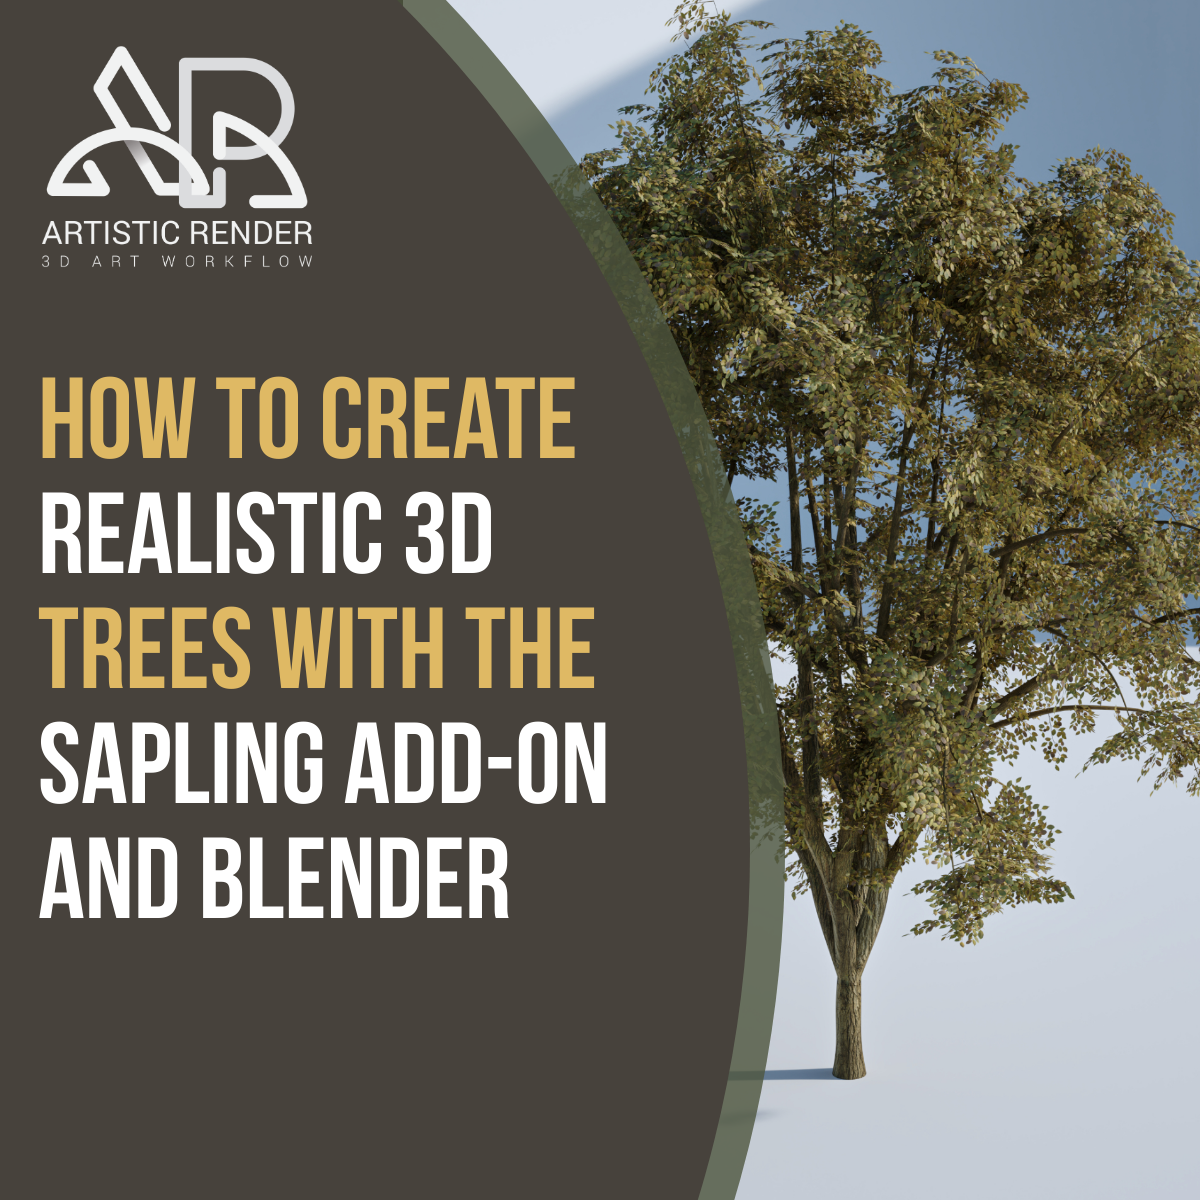 How to create realistic 3D trees with the sapling -